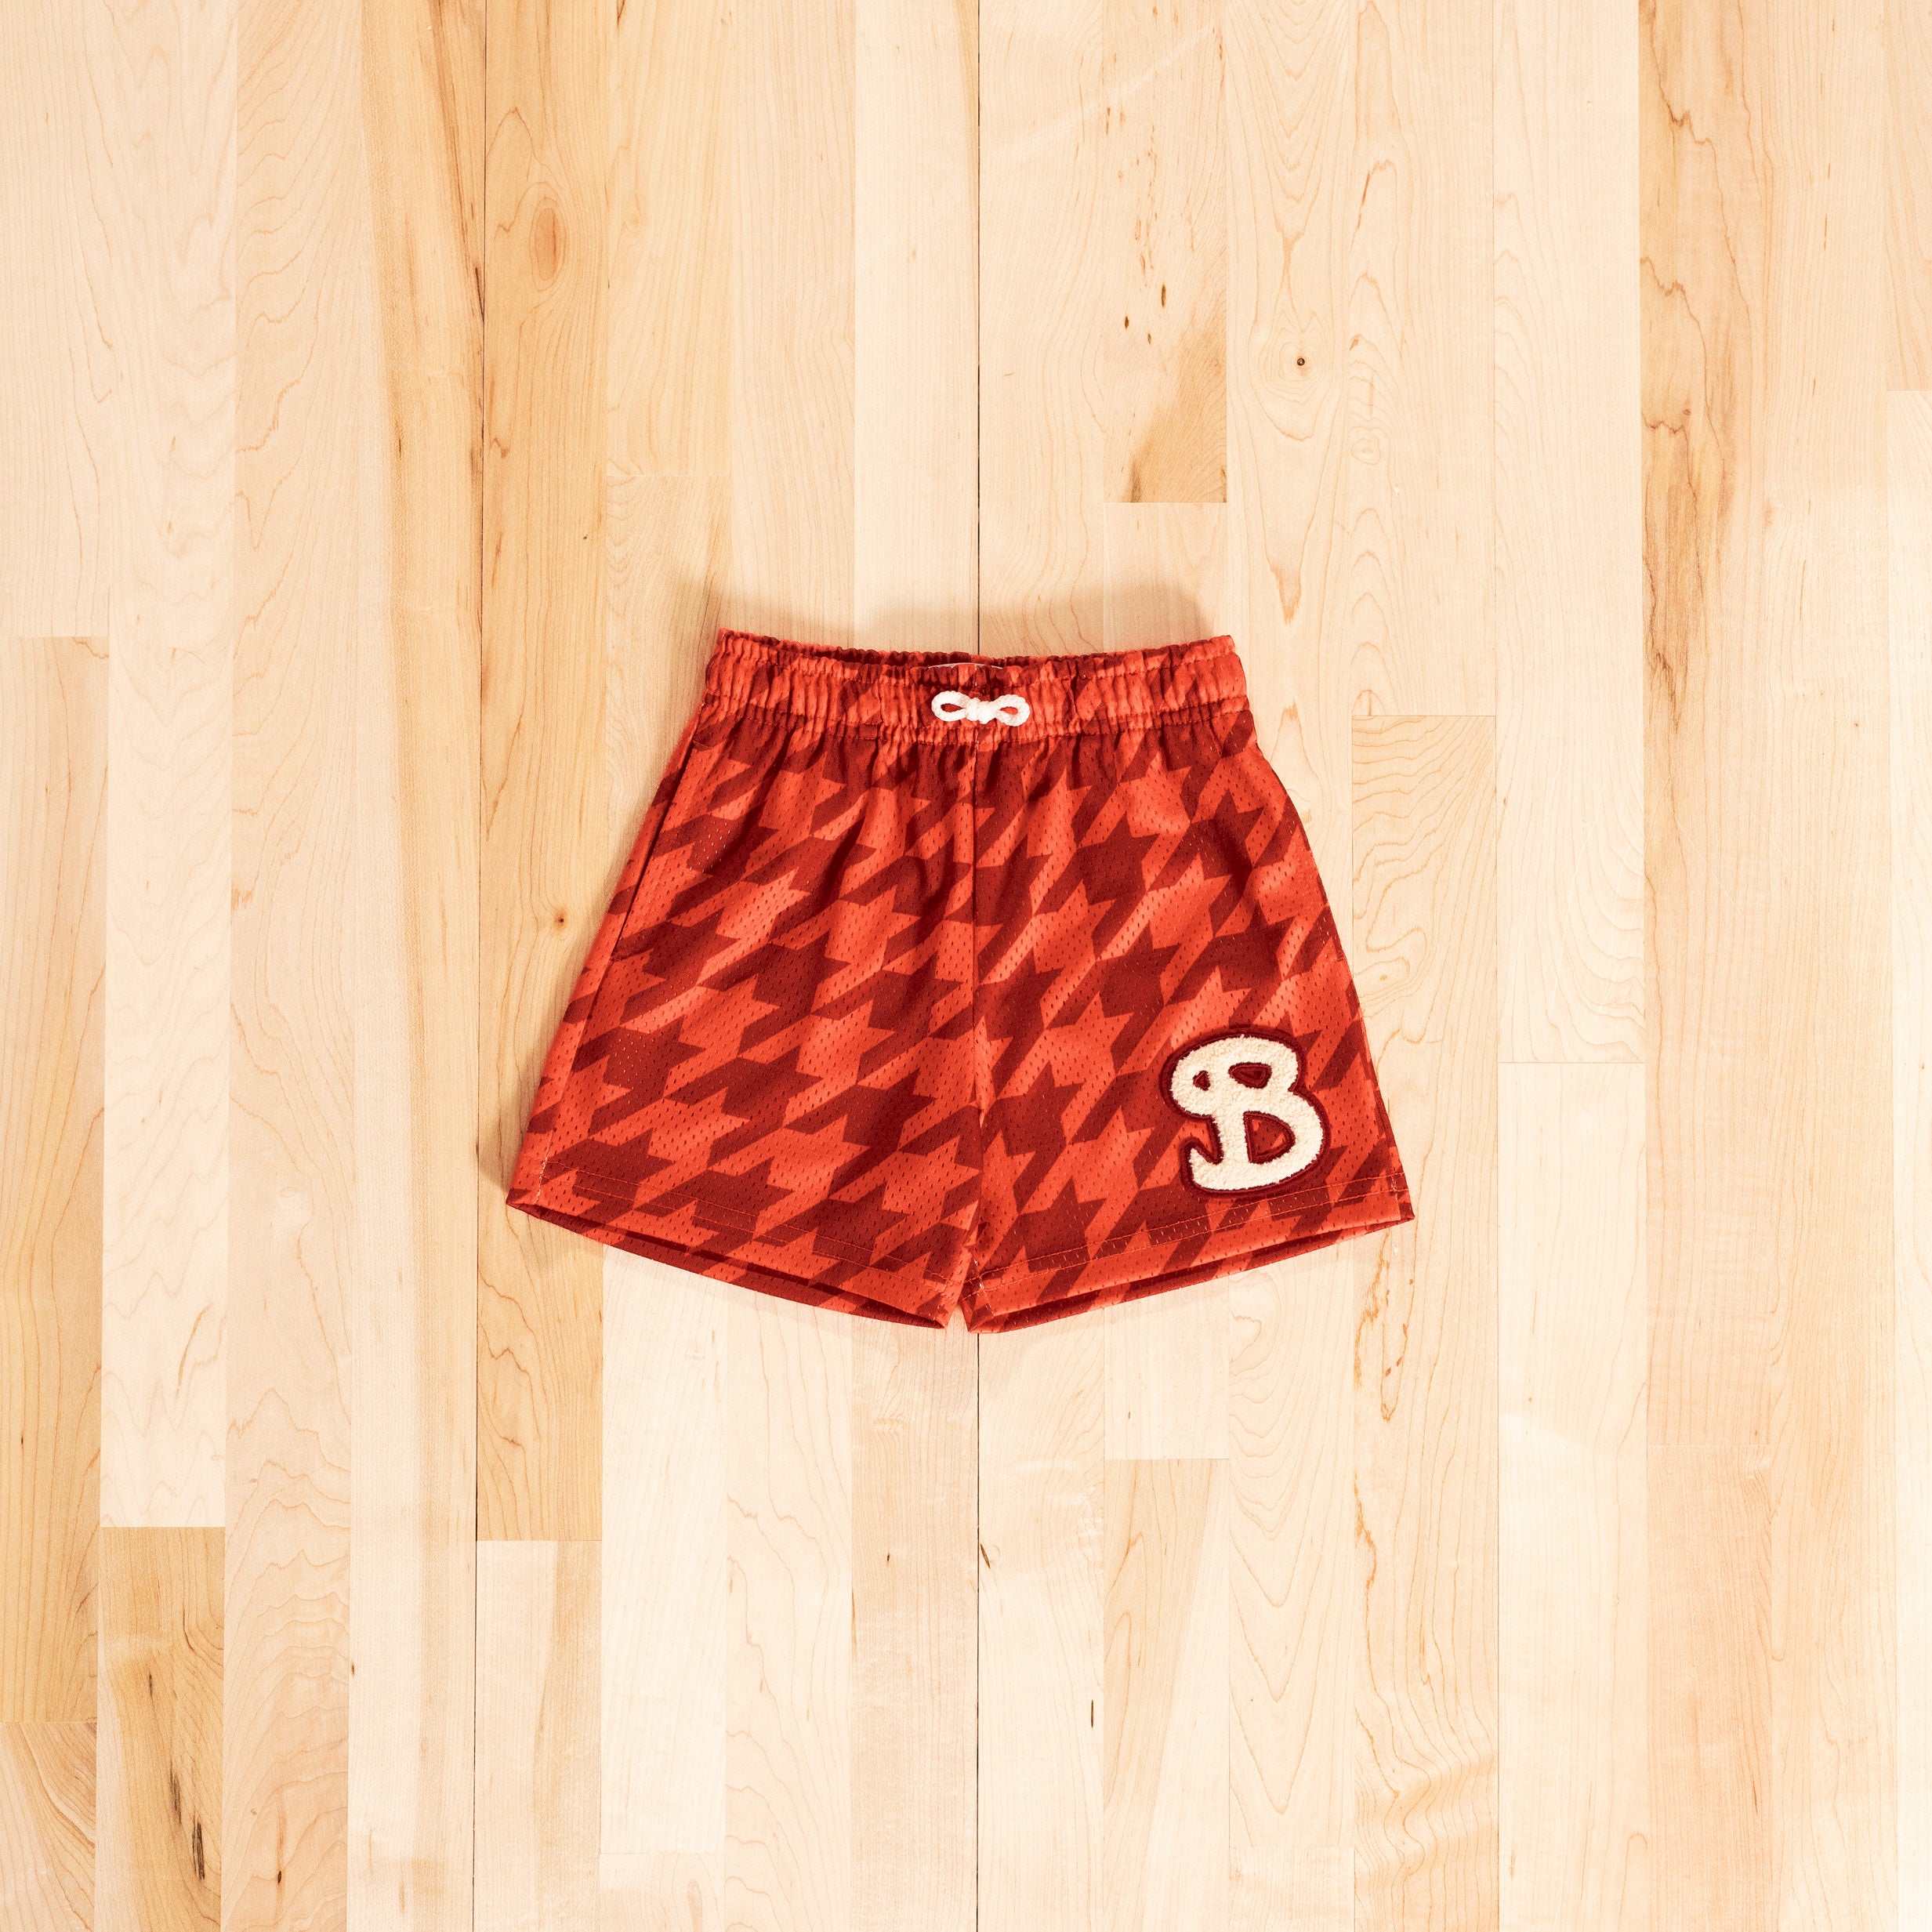 HOUNDSTOOTH YOUTH SHORTS - REDDEST RED